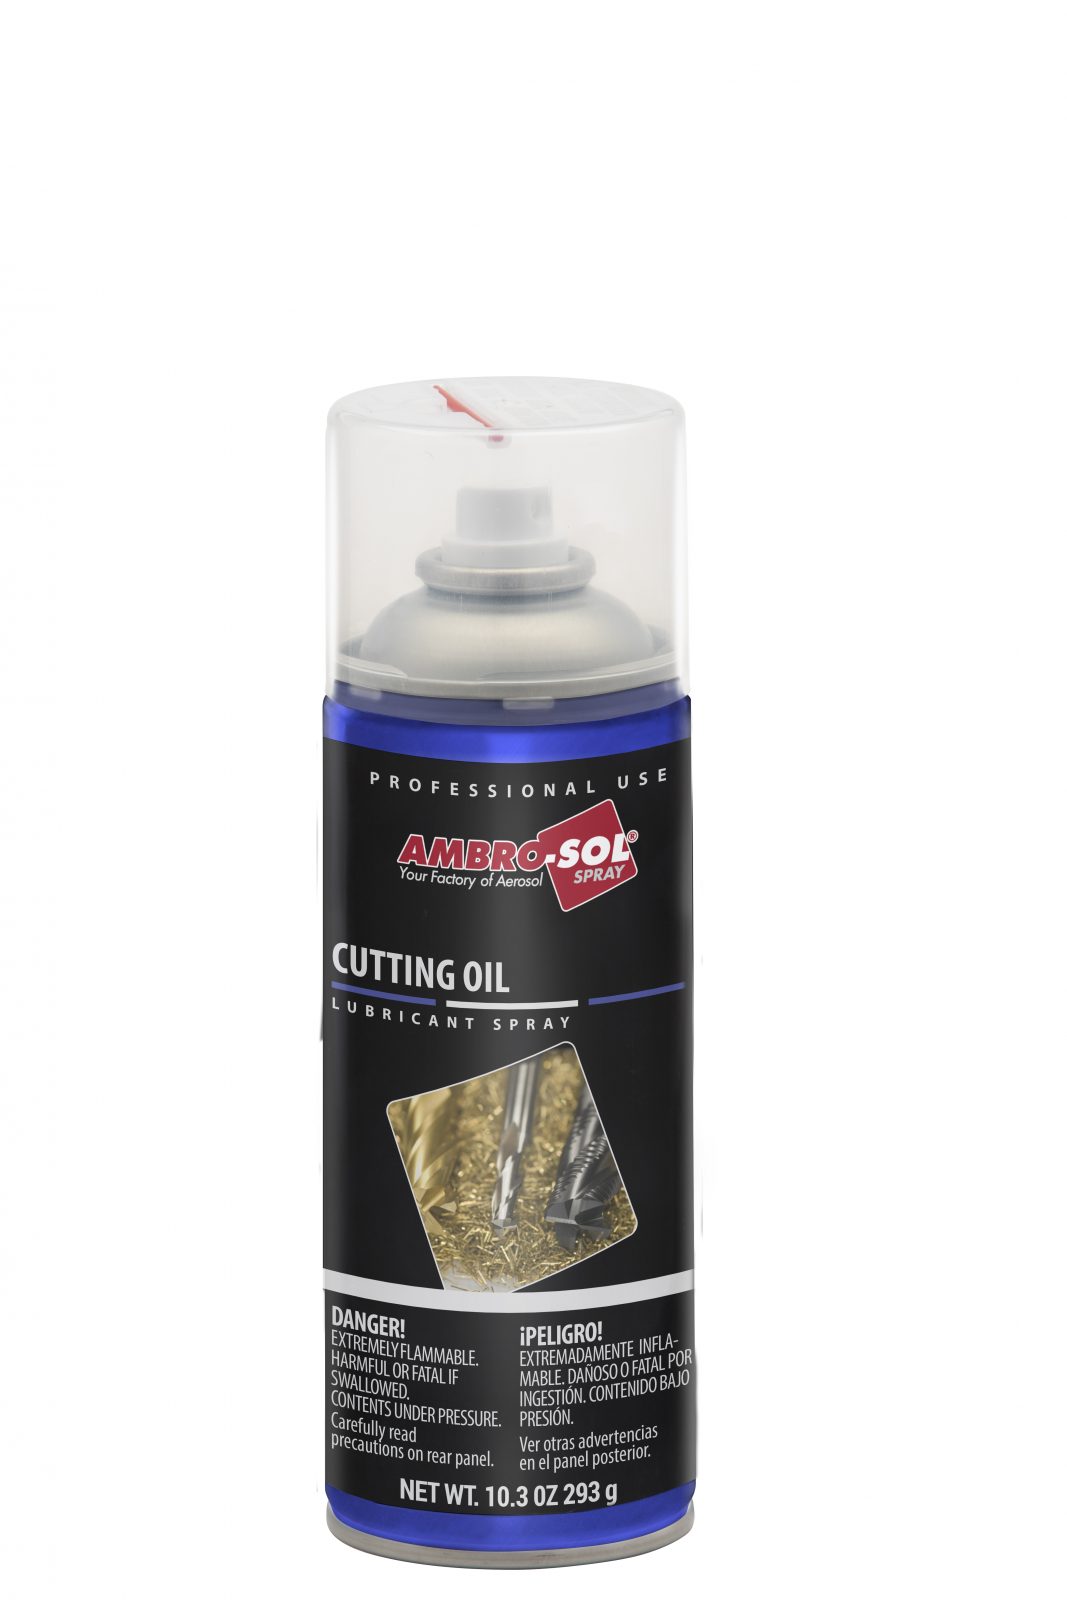 Cutting Oil developed for professional applications in hard metal cutting operations, the Cutting Oil lubricant spray is a heavy duty protective tool.